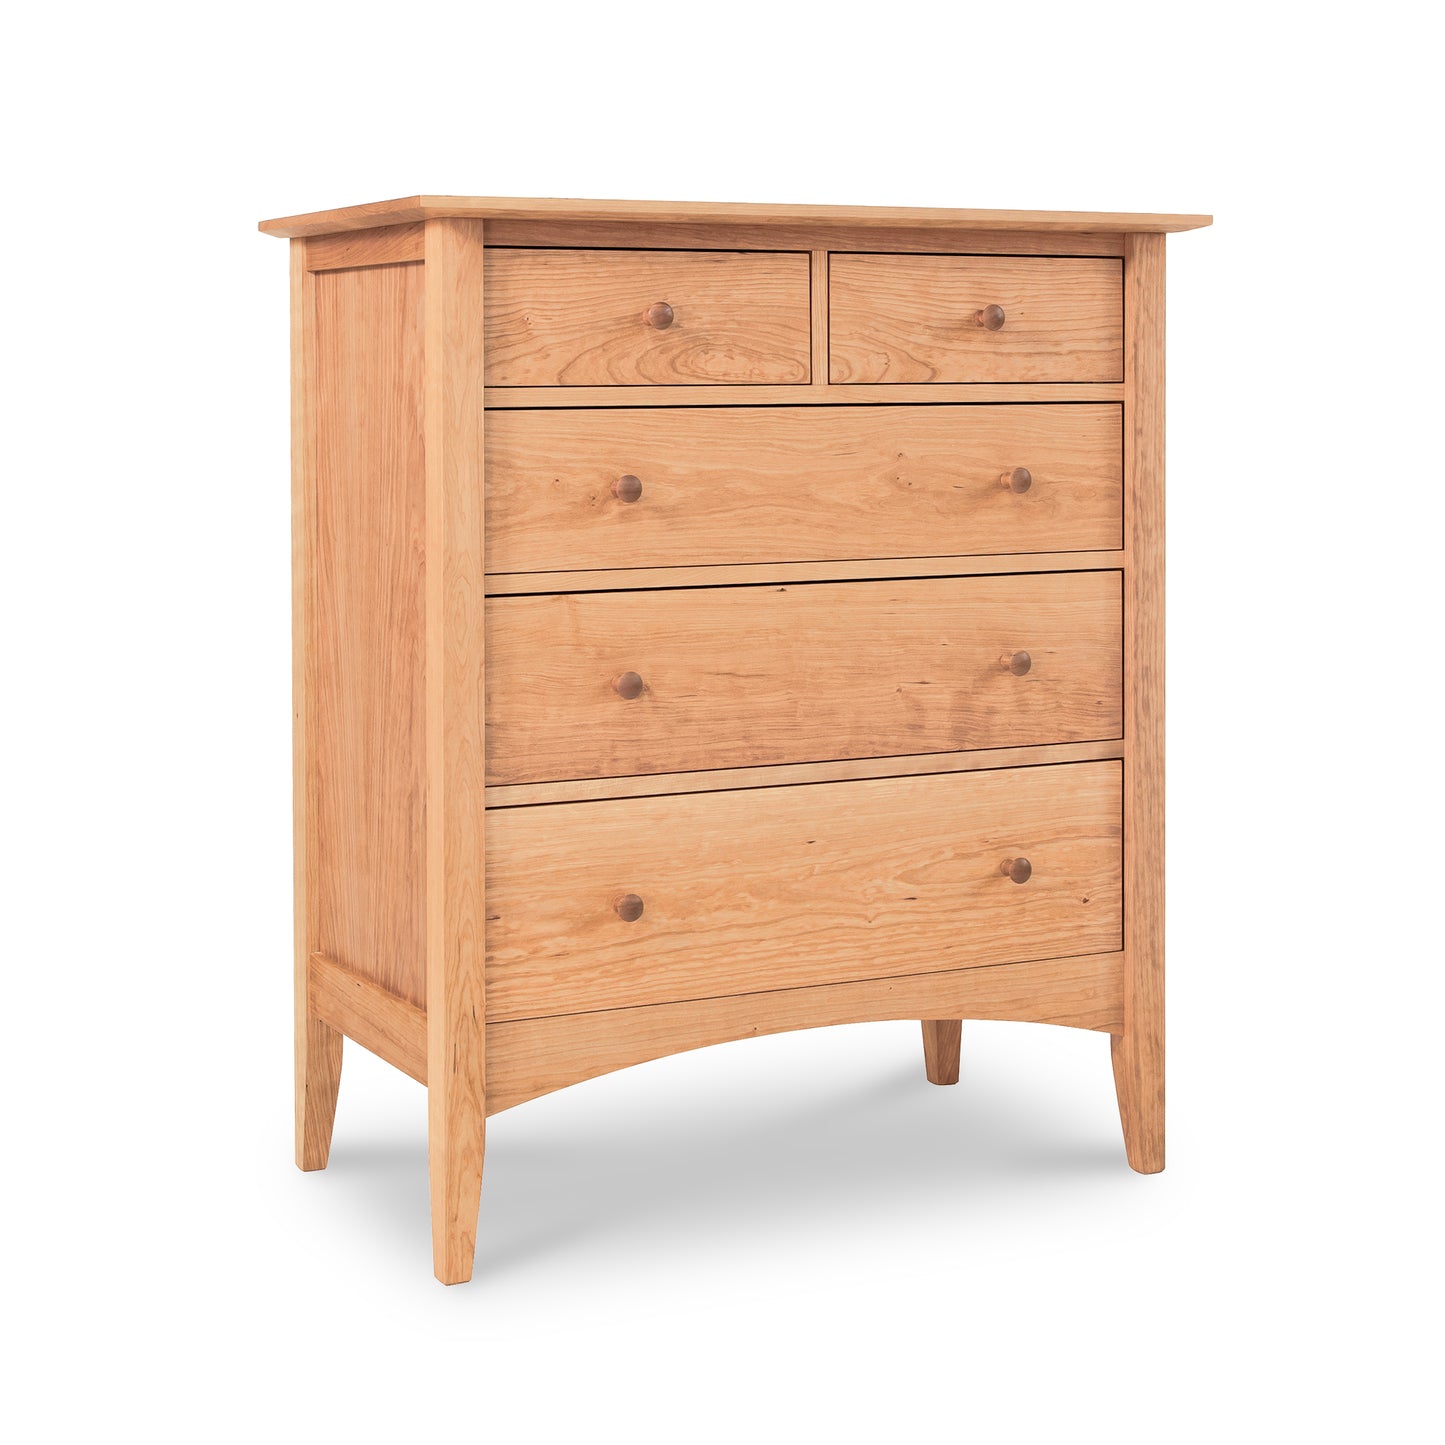 A Maple Corner Woodworks American Shaker 5-Drawer Chest, made from sustainably harvested wood, featuring round knobs and tapered legs, isolated on a white background.